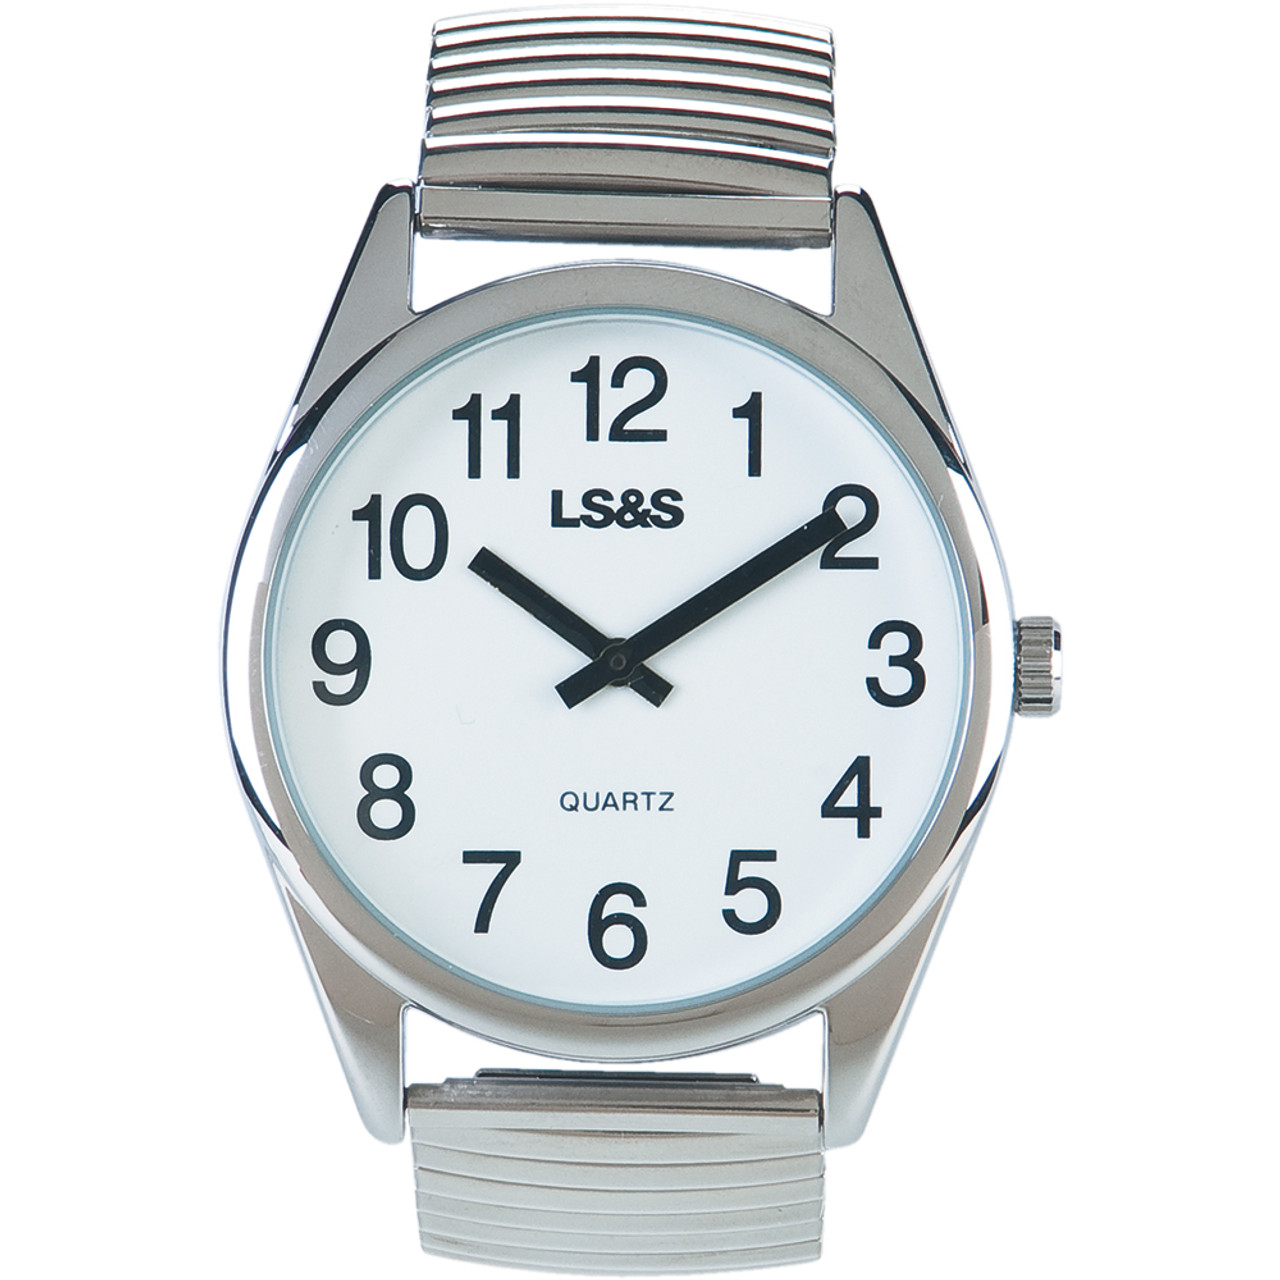 Low Vision Watch - White Face - Silver Expansion Band